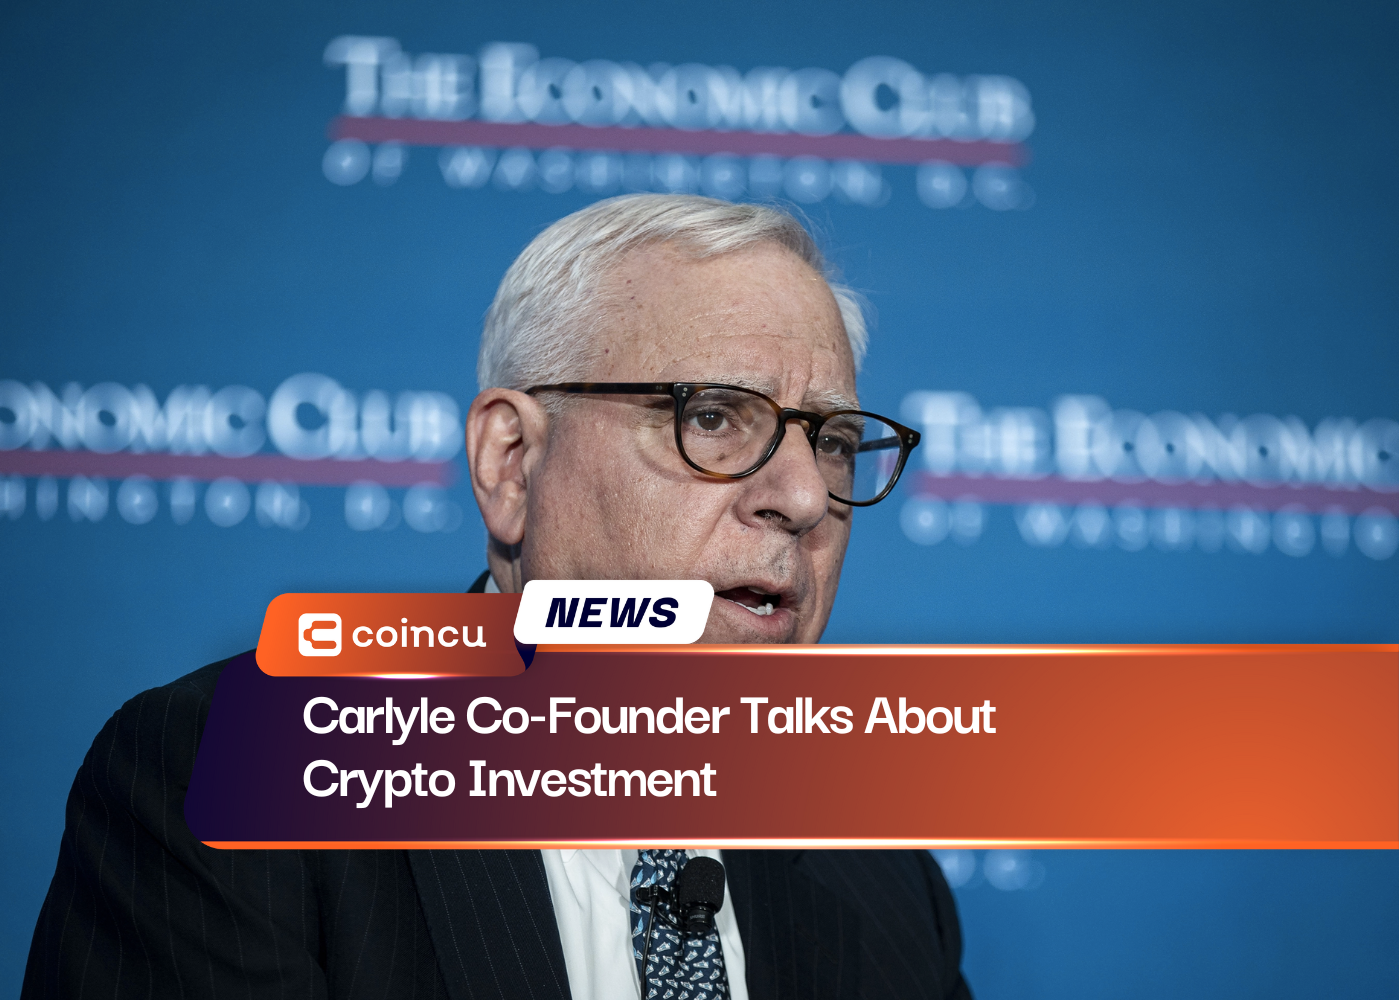 Carlyle Co-Founder Talks About Crypto Investment